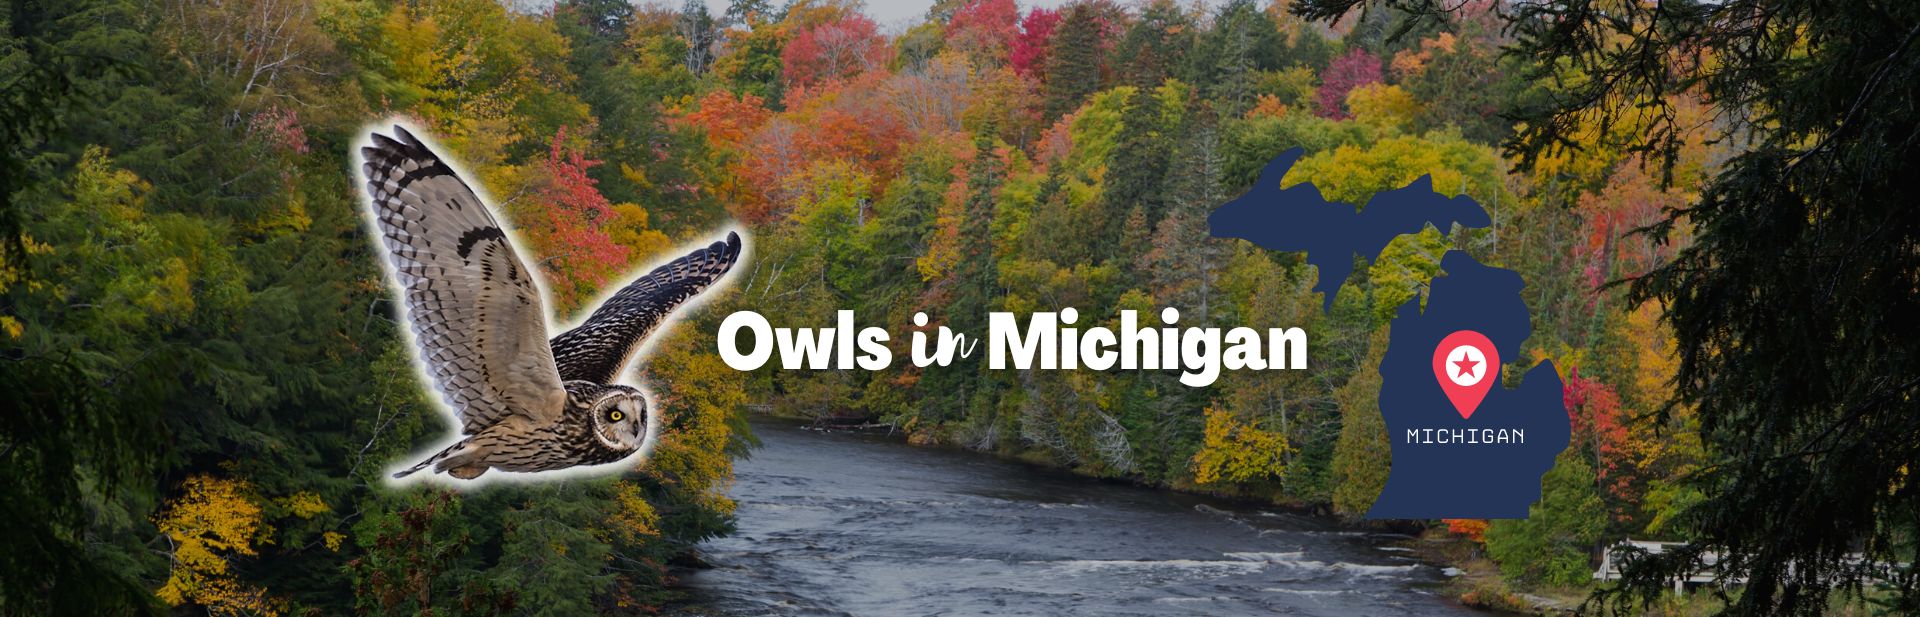 11 Owls in Michigan: What Hoots in the Wolverine State?